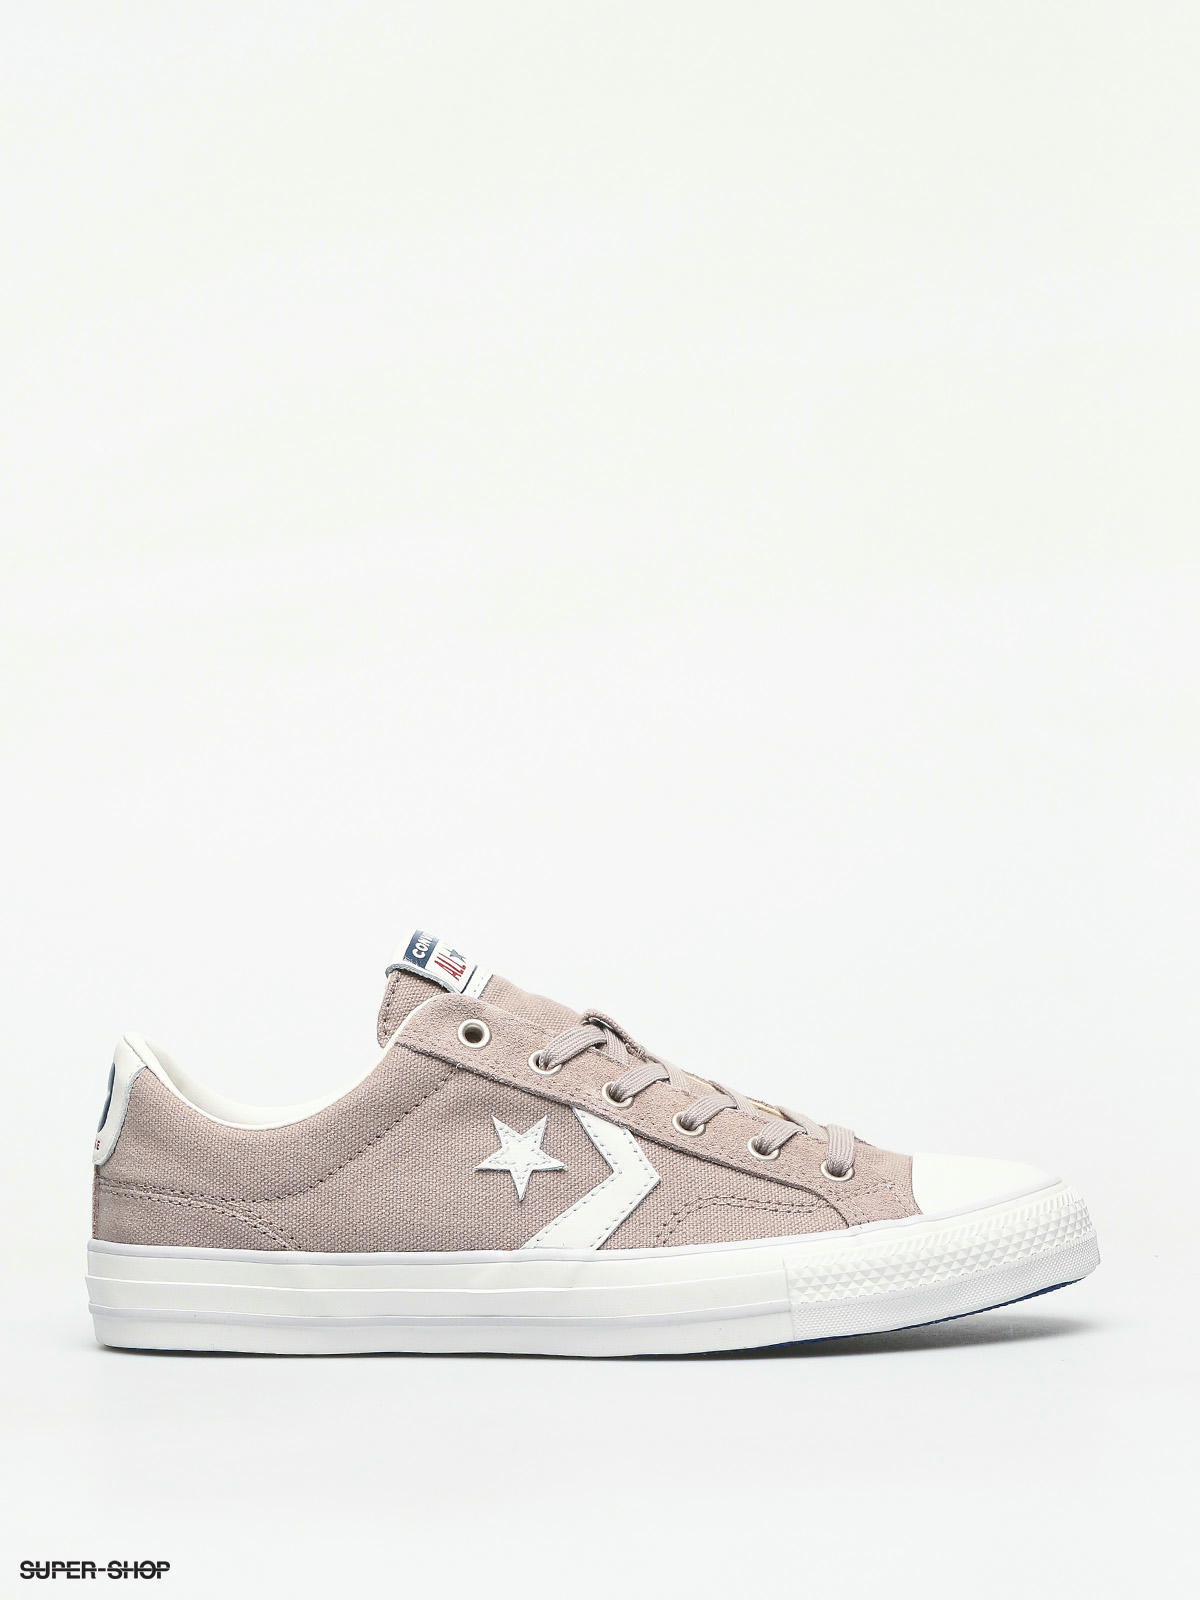 converse star player ox suede